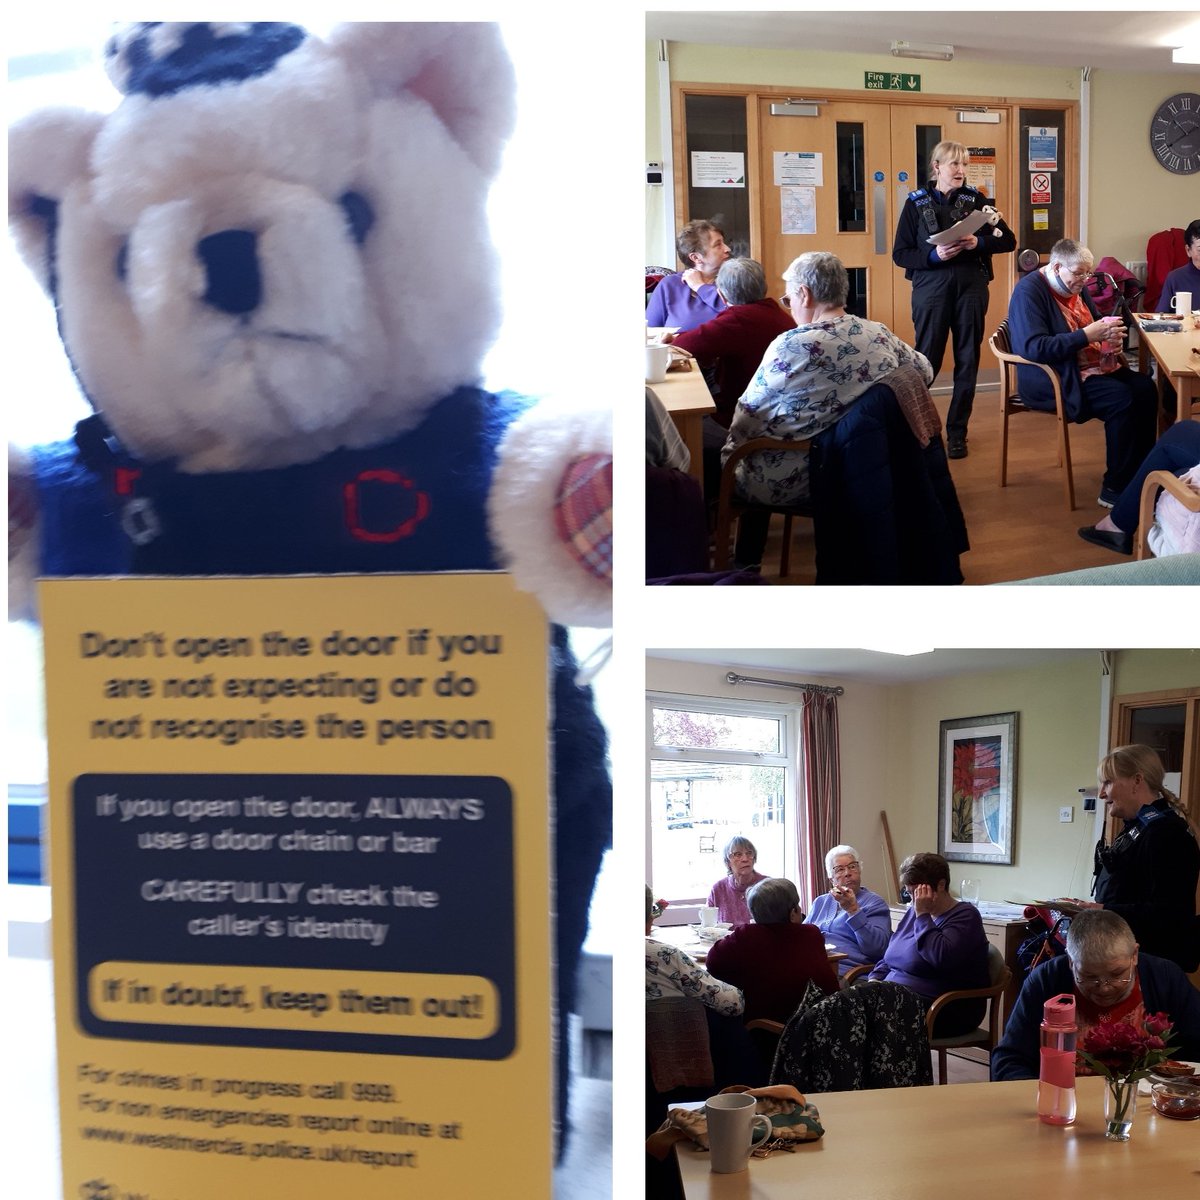 PCSO Davis, local SNT, visiting Meadcroft, Madeley coffee morning. Lots of information and discussion on keeping safe, fraud, scams and bogus callers. Enjoyed by all.